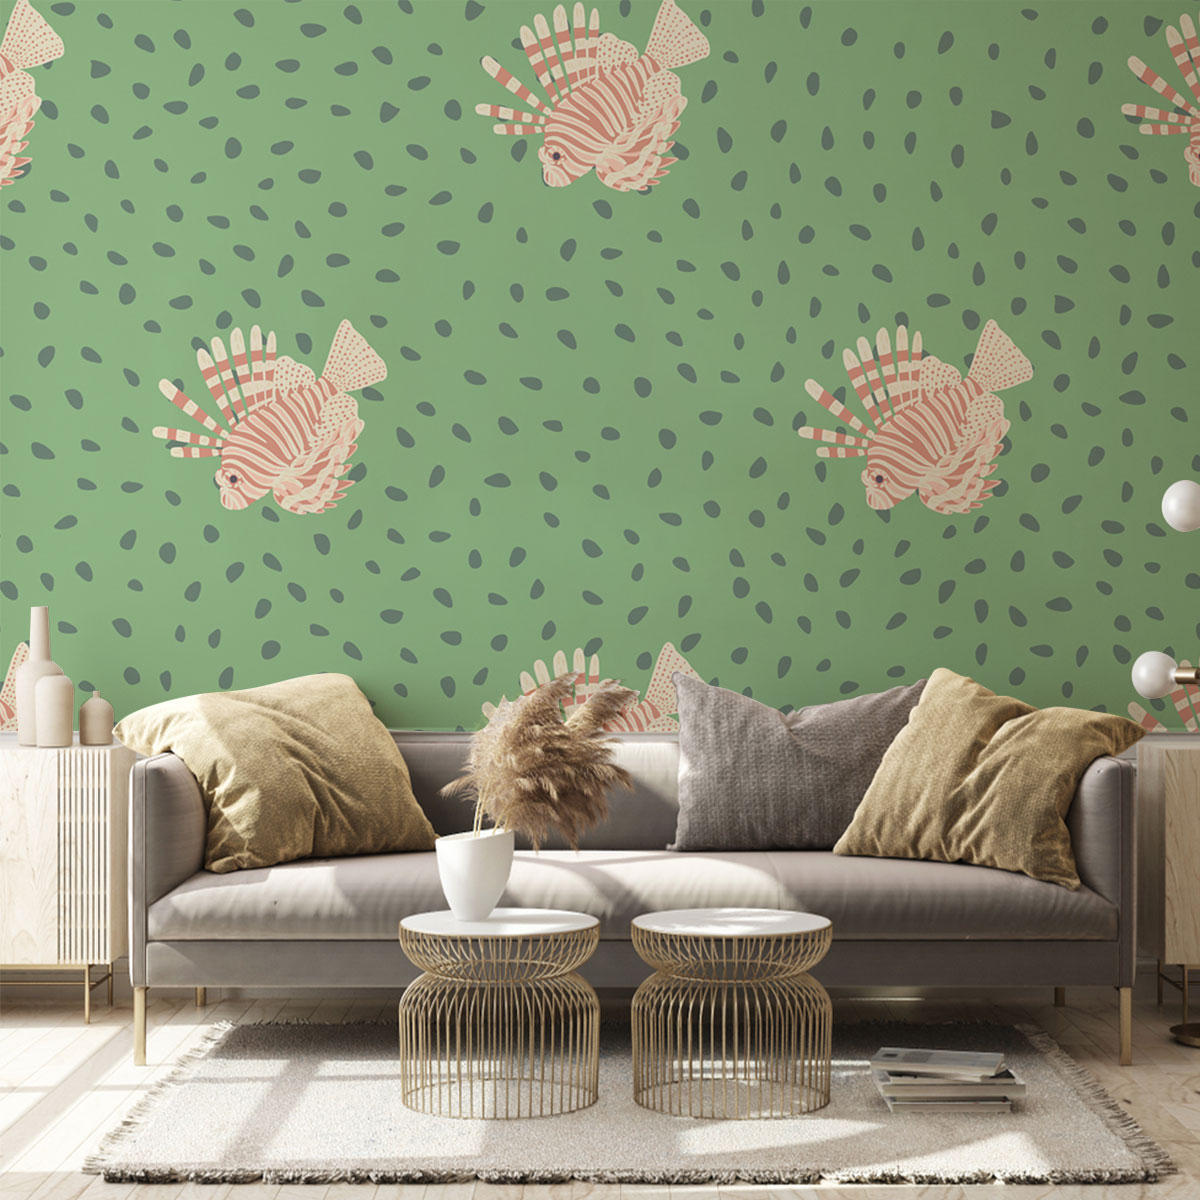 Pink Lionfish On Green Wall Mural